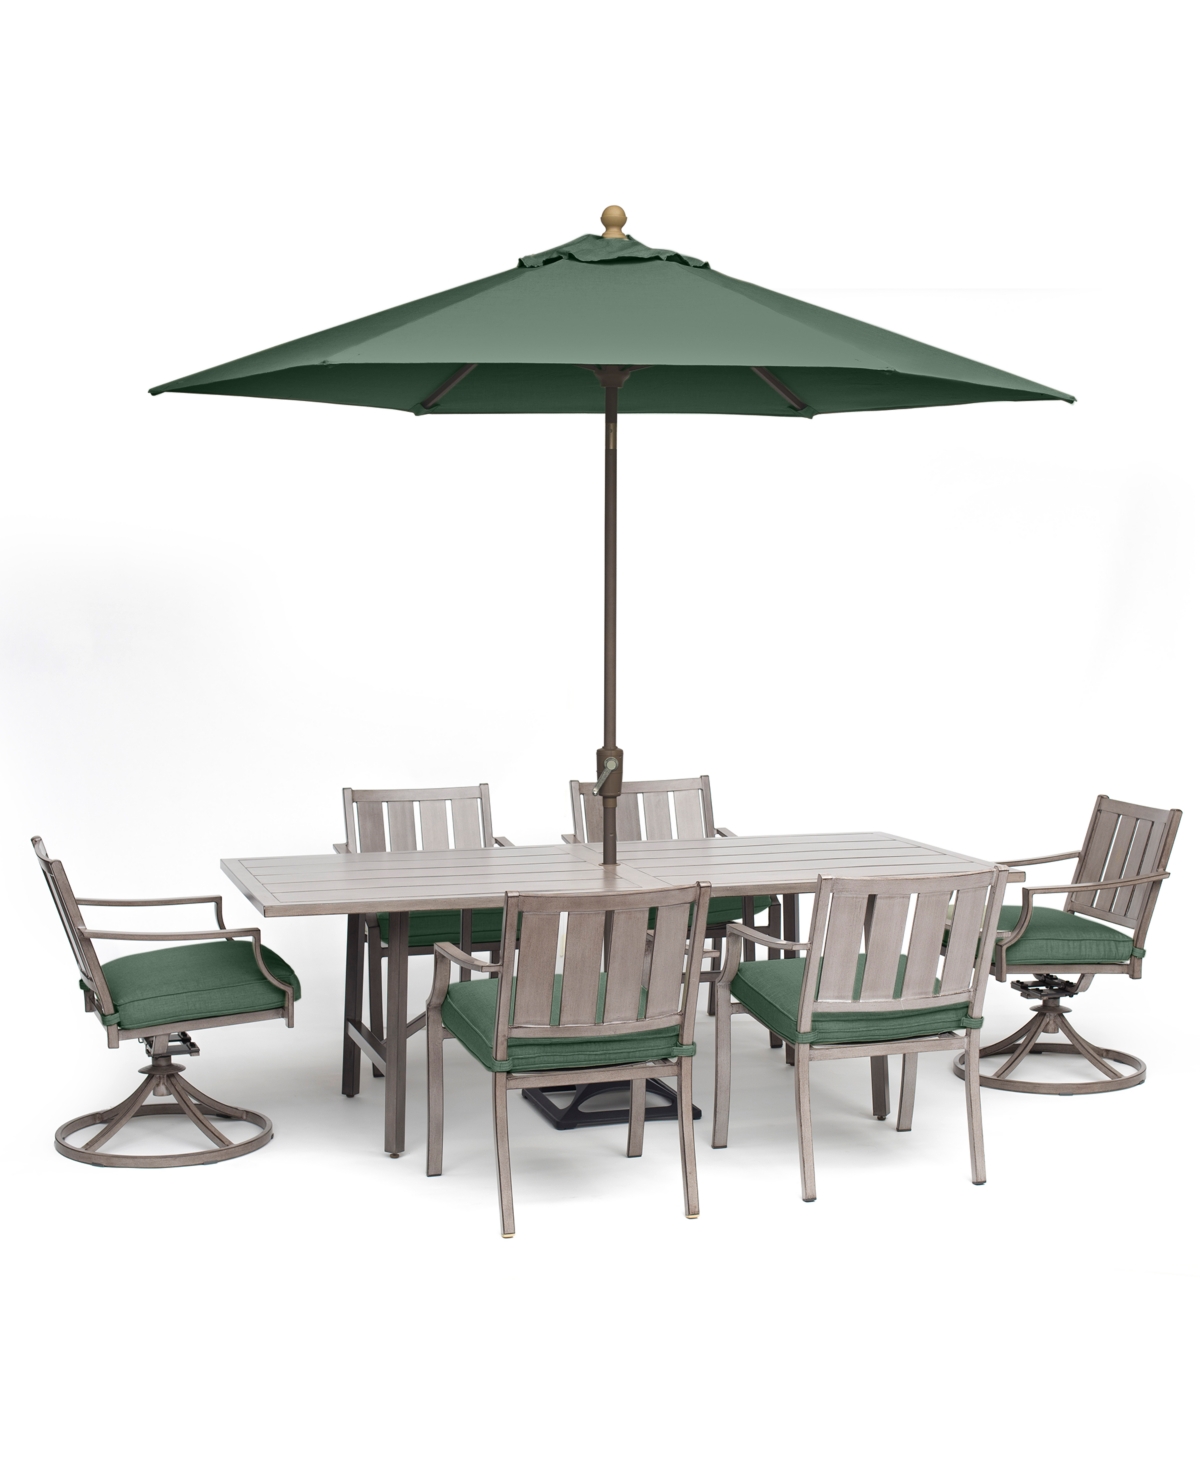 Agio Wayland Outdoor Aluminum 7-pc. Dining Set (84" X 42" Rectangle Dining Table, 4 Dining Chairs & 2 Swi In Outdura Grasshopper